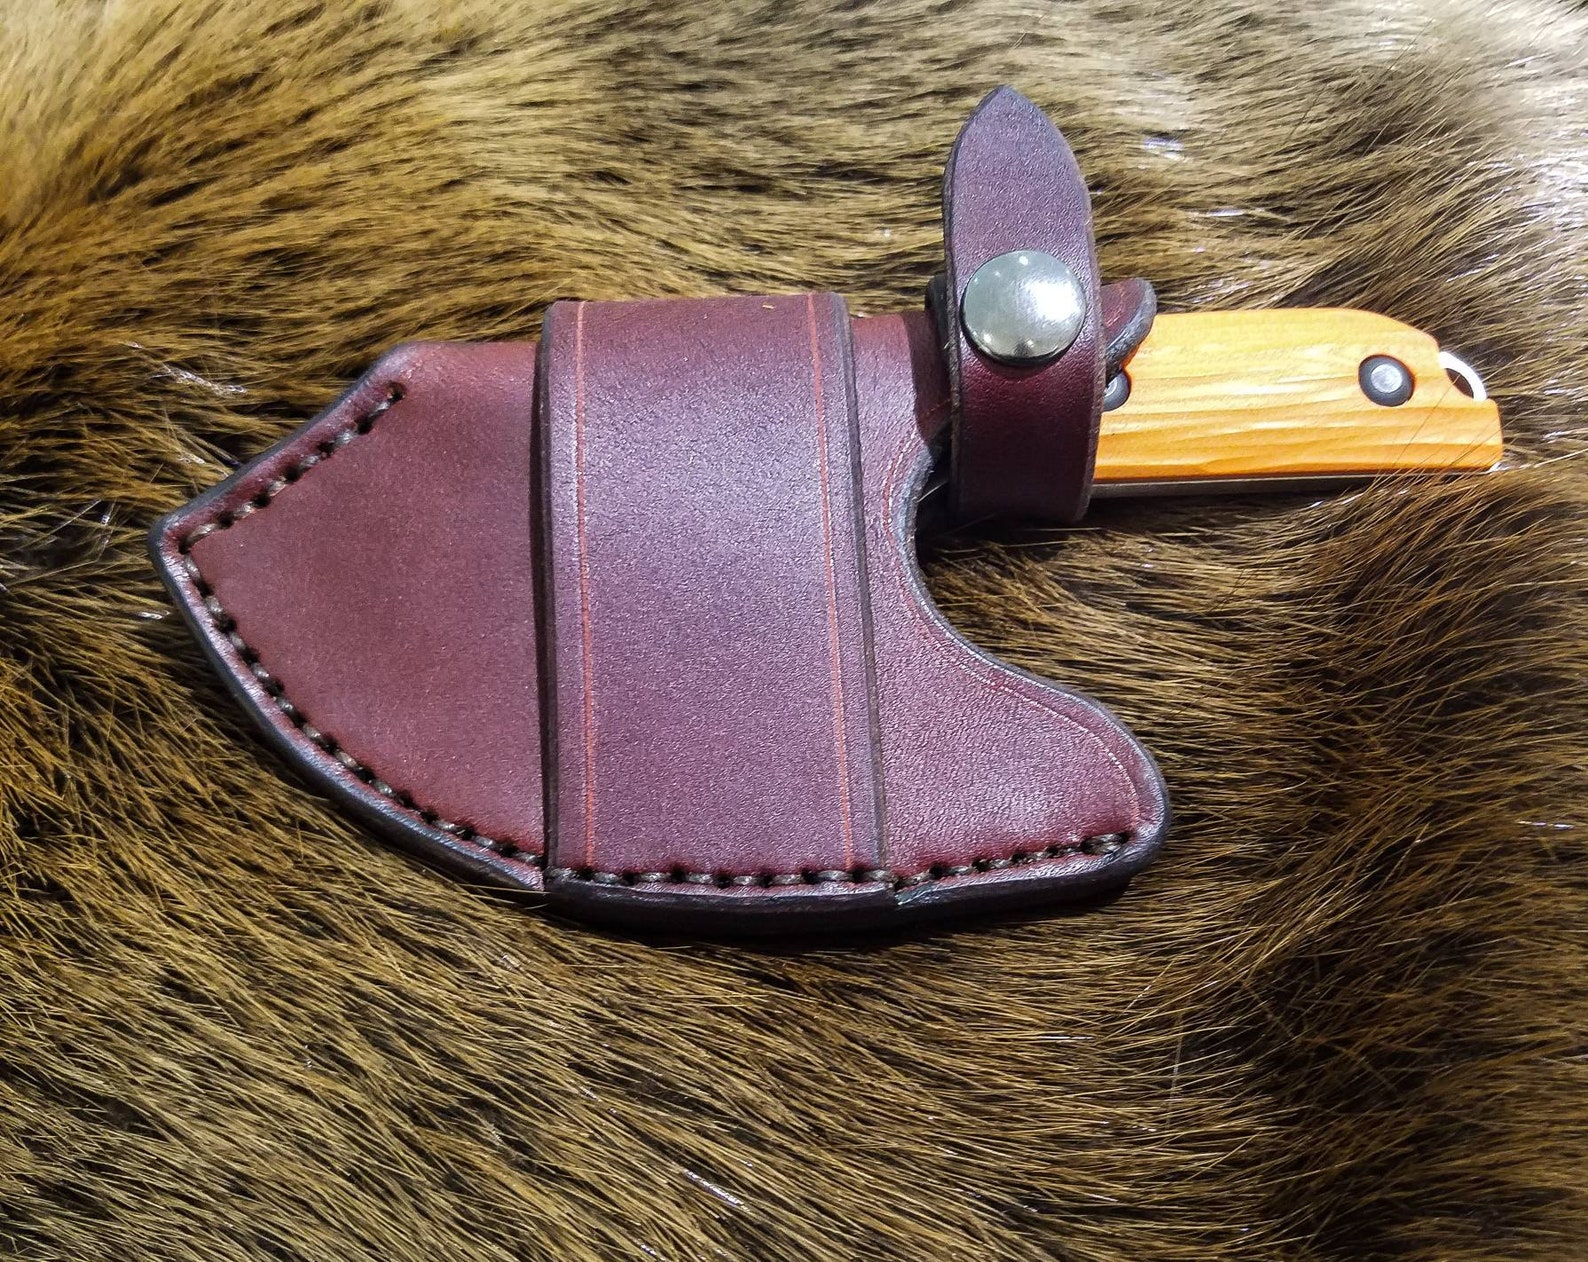 Leather Scout Sheath for the Benchmade Nestucca Cleaver - Etsy